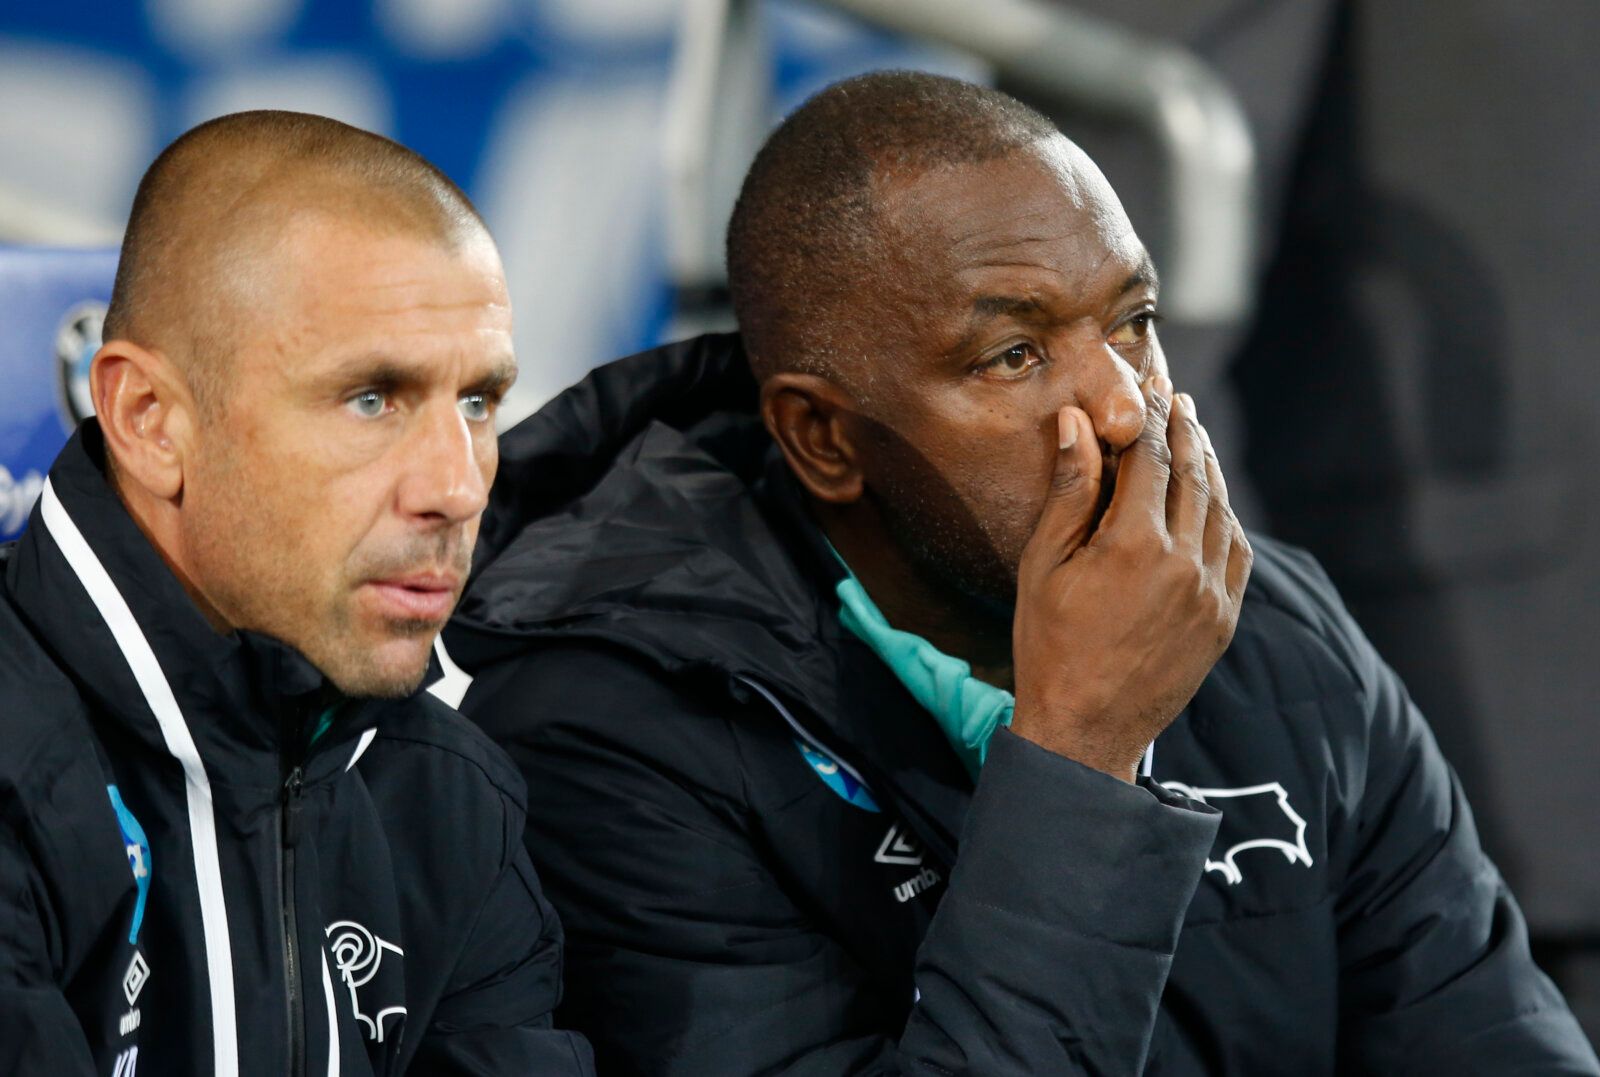 Britain Soccer Football - Cardiff City v Derby County - Sky Bet Championship - Cardiff City Stadium - 27/9/16
Derby's Caretaker Manager Chris Powell with coach Kevin Phillips (L)
Mandatory Credit: Action Images / Paul Childs
Livepic
EDITORIAL USE ONLY. No use with unauthorized audio, video, data, fixture lists, club/league logos or 